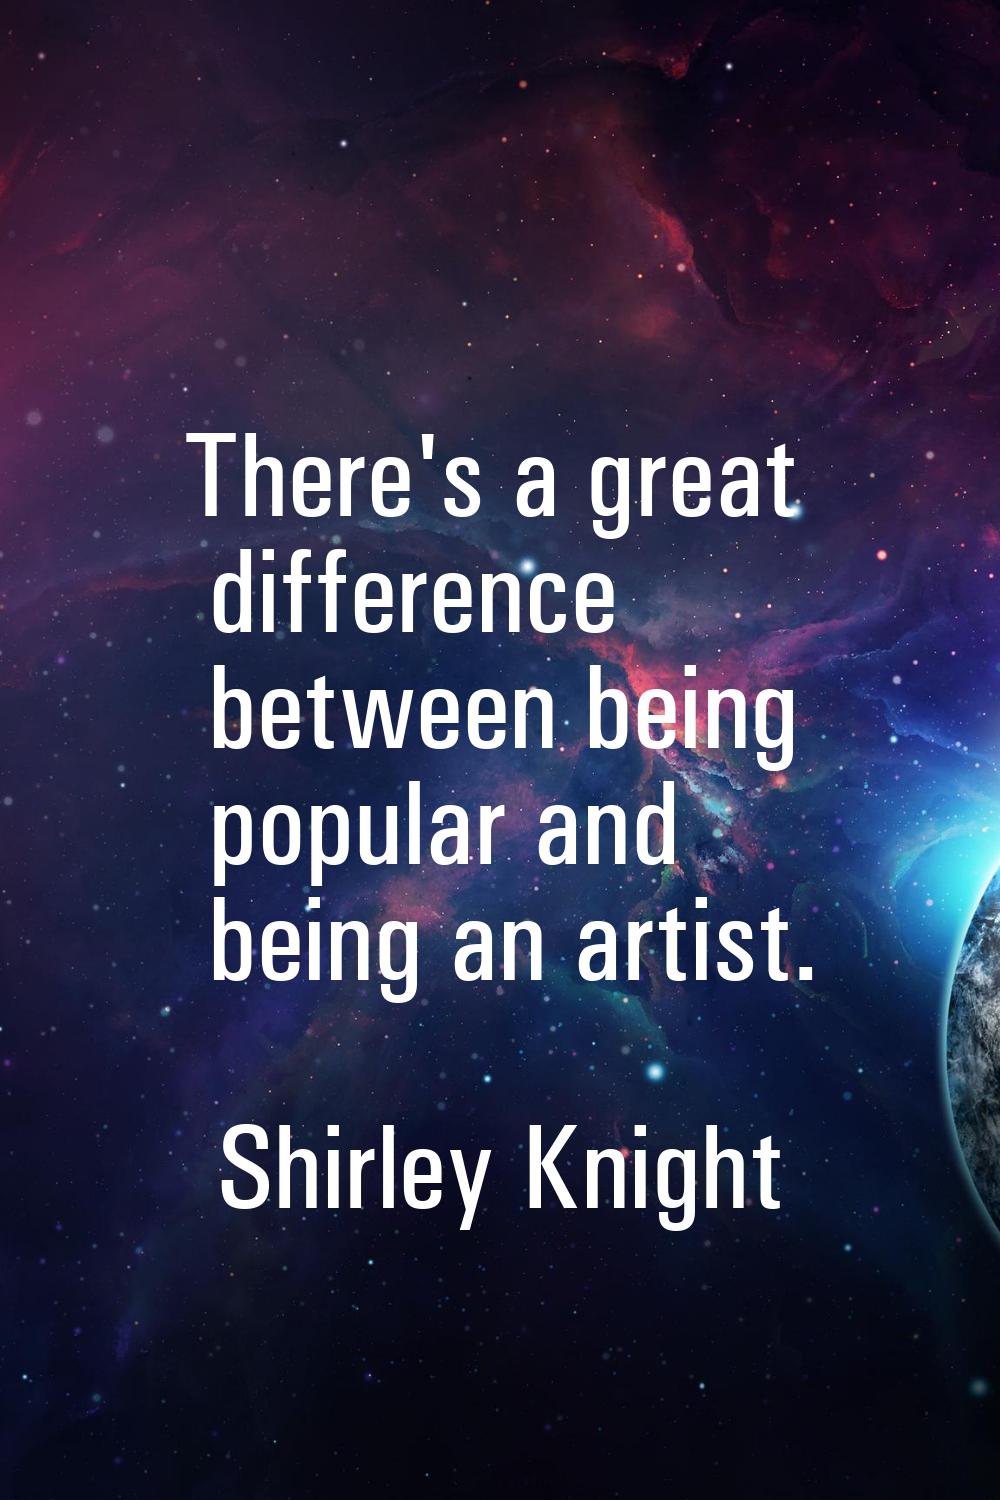 There's a great difference between being popular and being an artist.